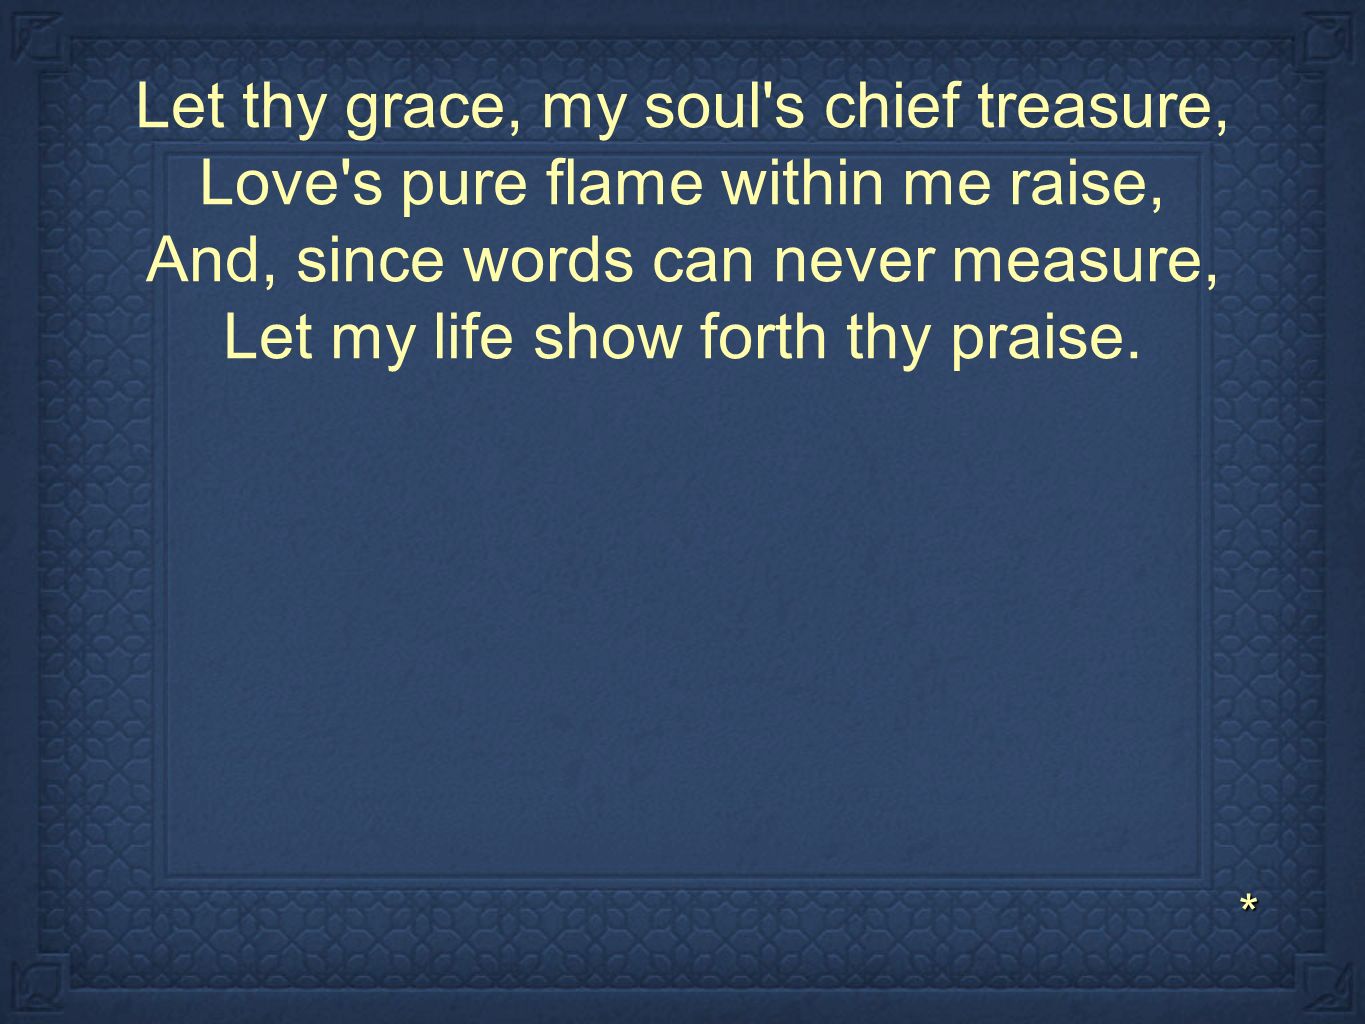 Let thy grace, my soul s chief treasure, Love s pure flame within me raise, And, since words can never measure, Let my life show forth thy praise.